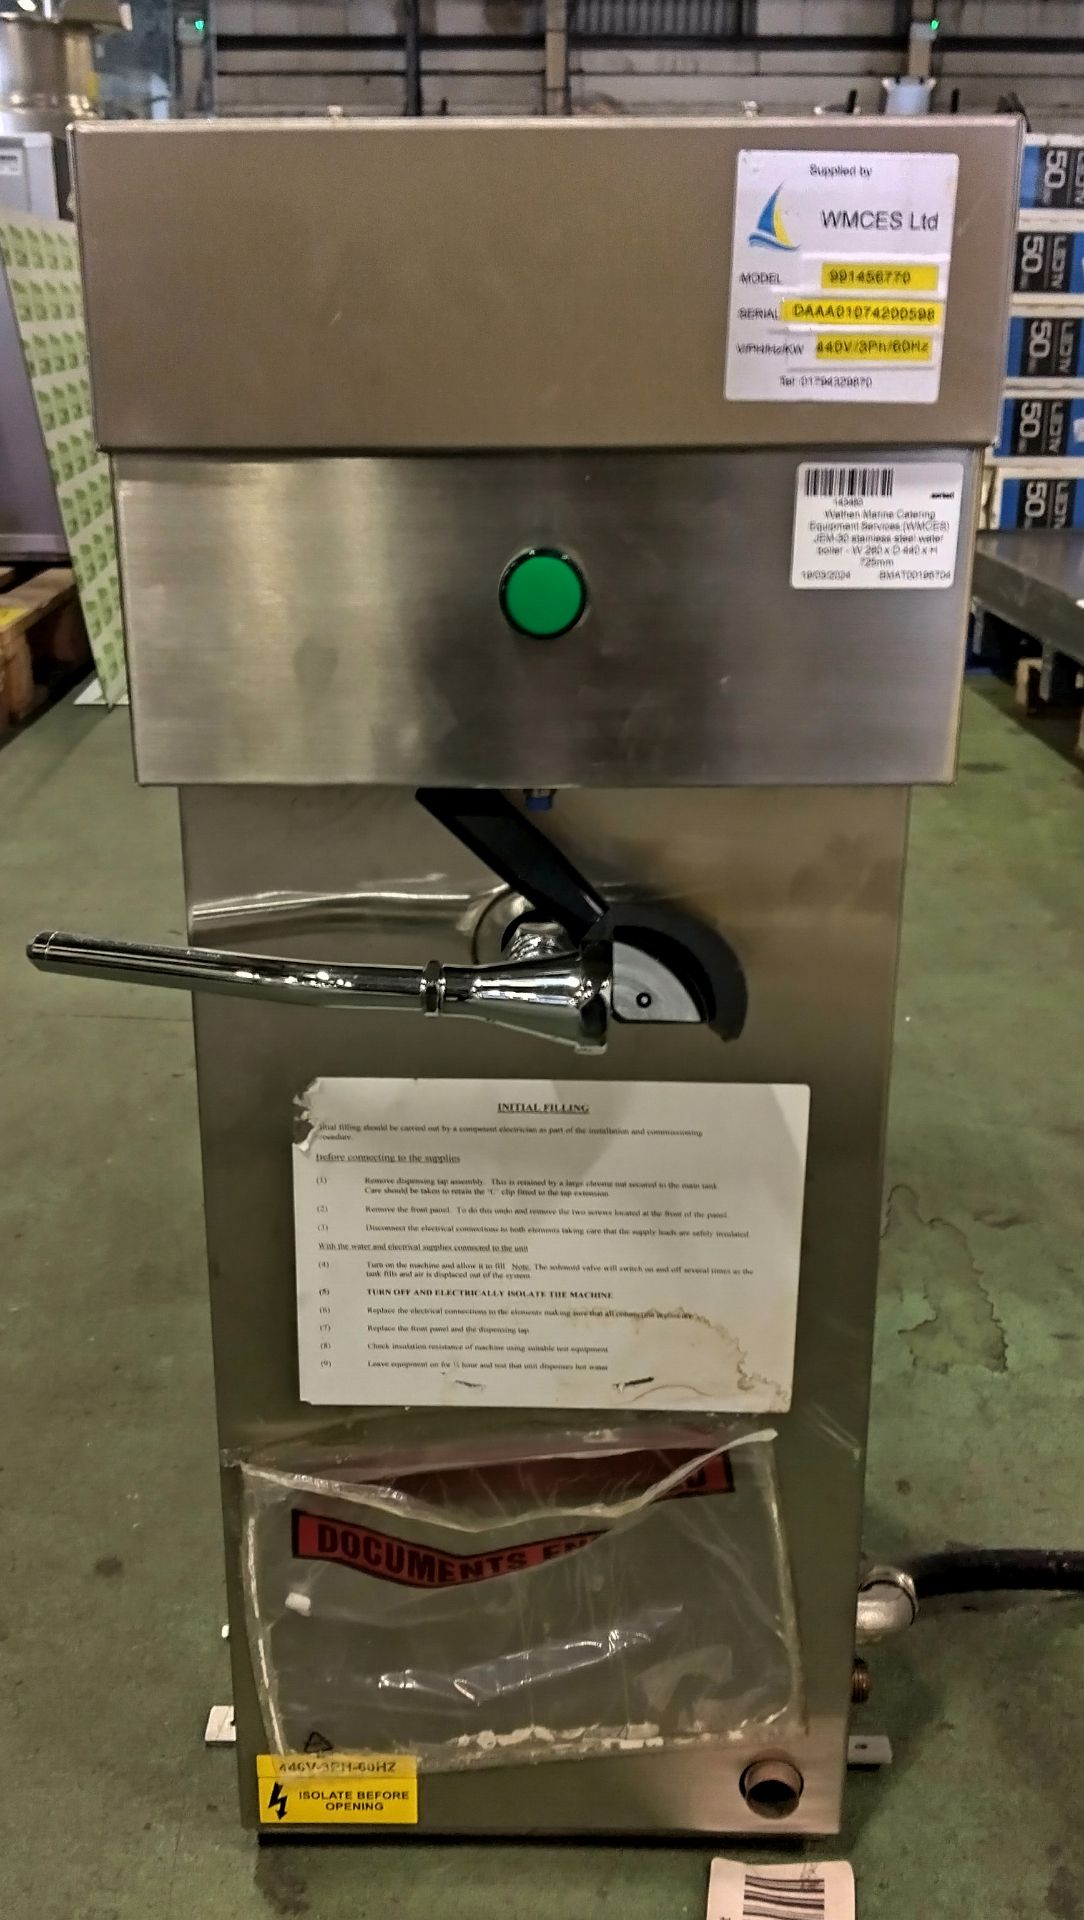 Wathen Marine Catering Equipment Services (WMCES) JEM-30 stainless steel water boiler - W 280